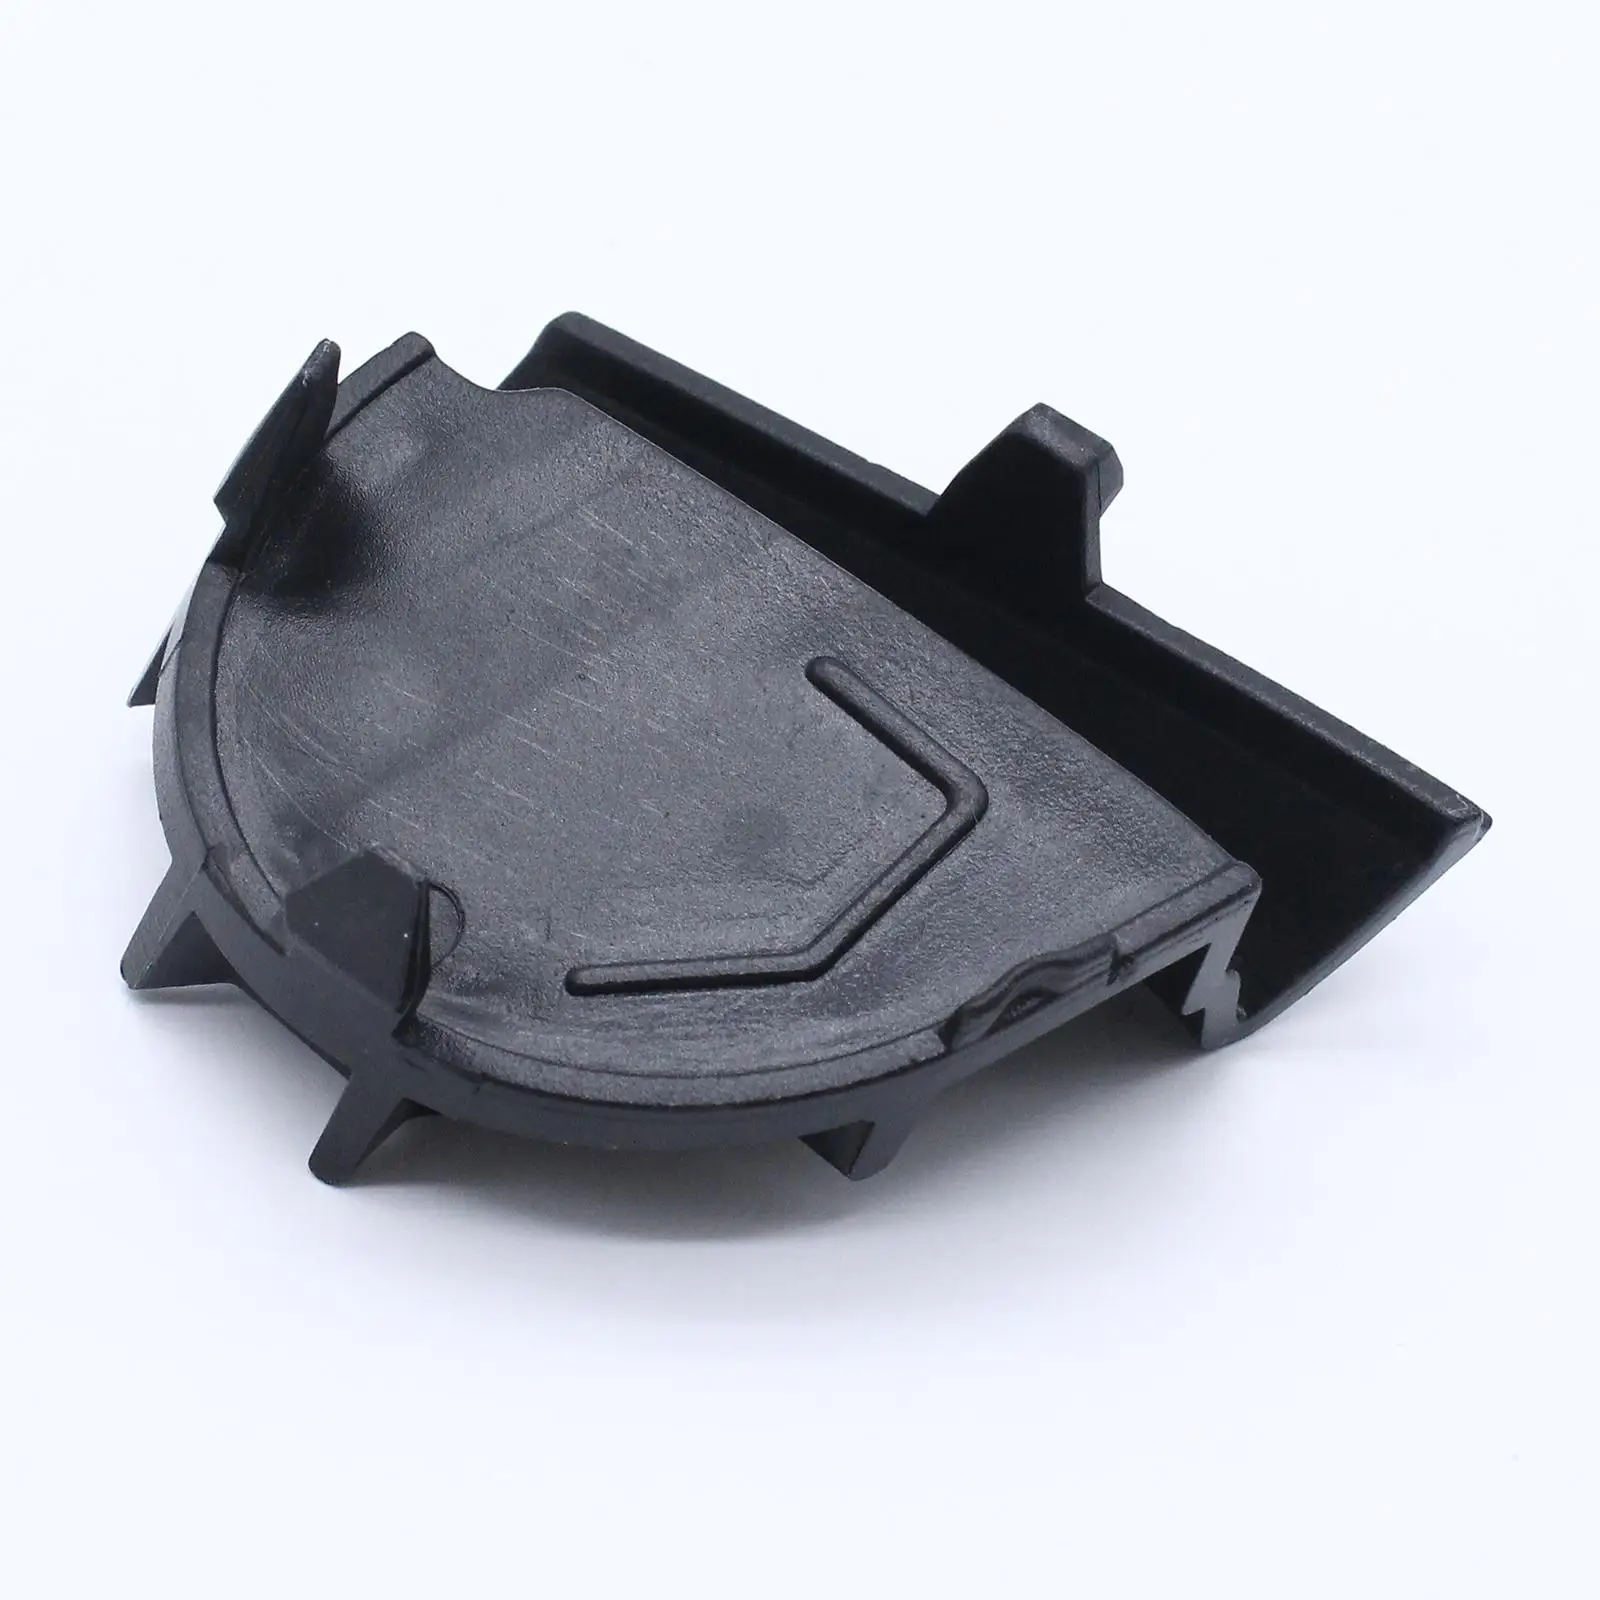 1880230 Replacement Accessories Car Parts Exterior Parts Front Bumper Towing Eye Cover Fit for Ford Focus MK3 2014-2018